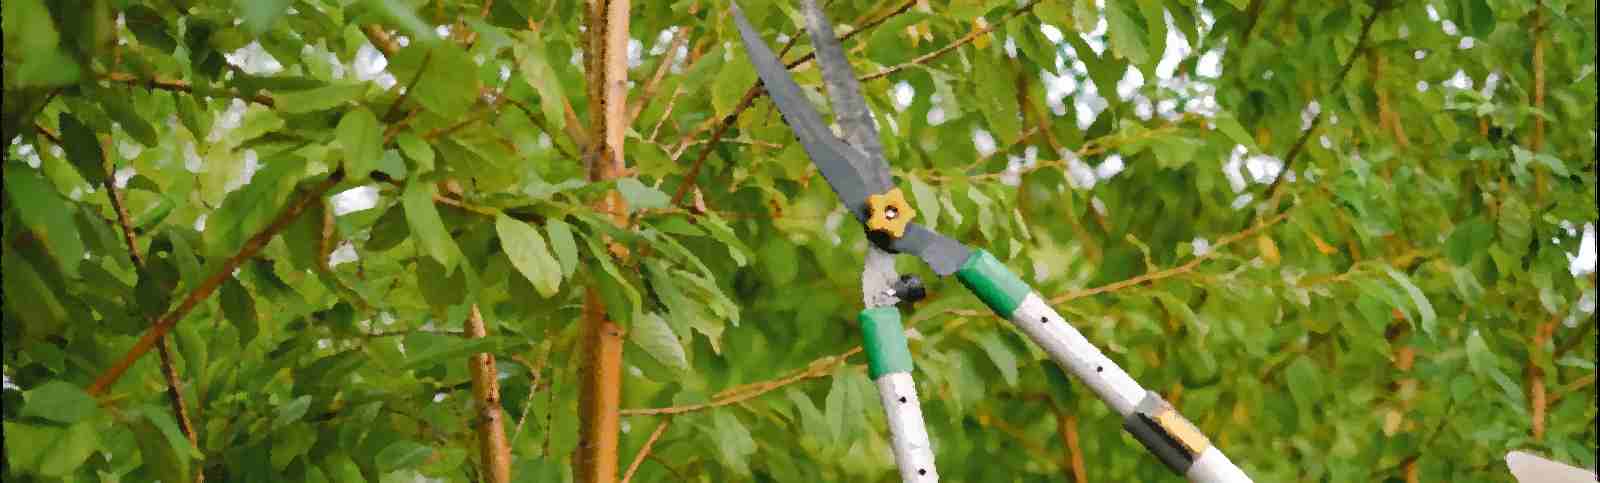 Homeowners Guide: Is Tree Pruning Necessary?